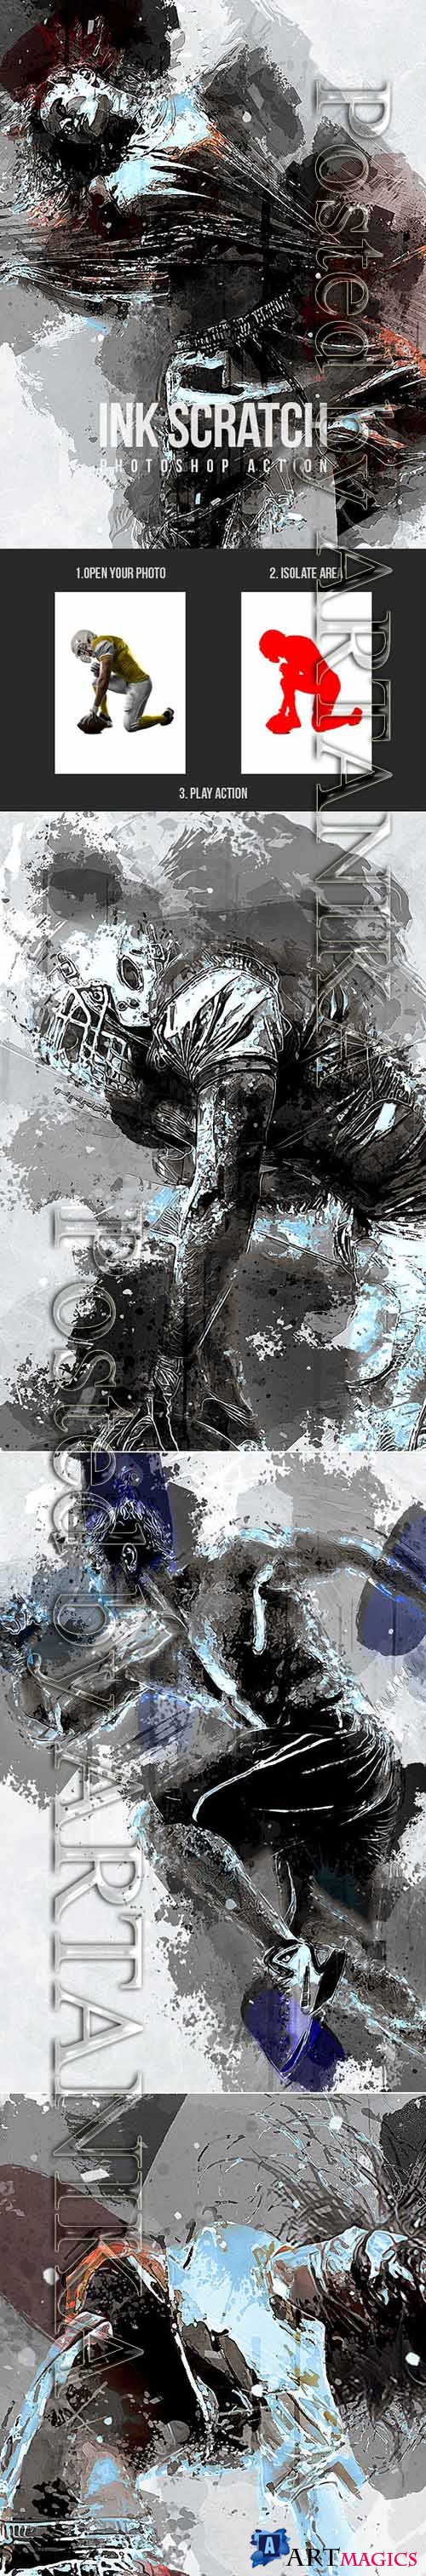 Graphicriver - Ink Scratch - Photoshop Action 21318489